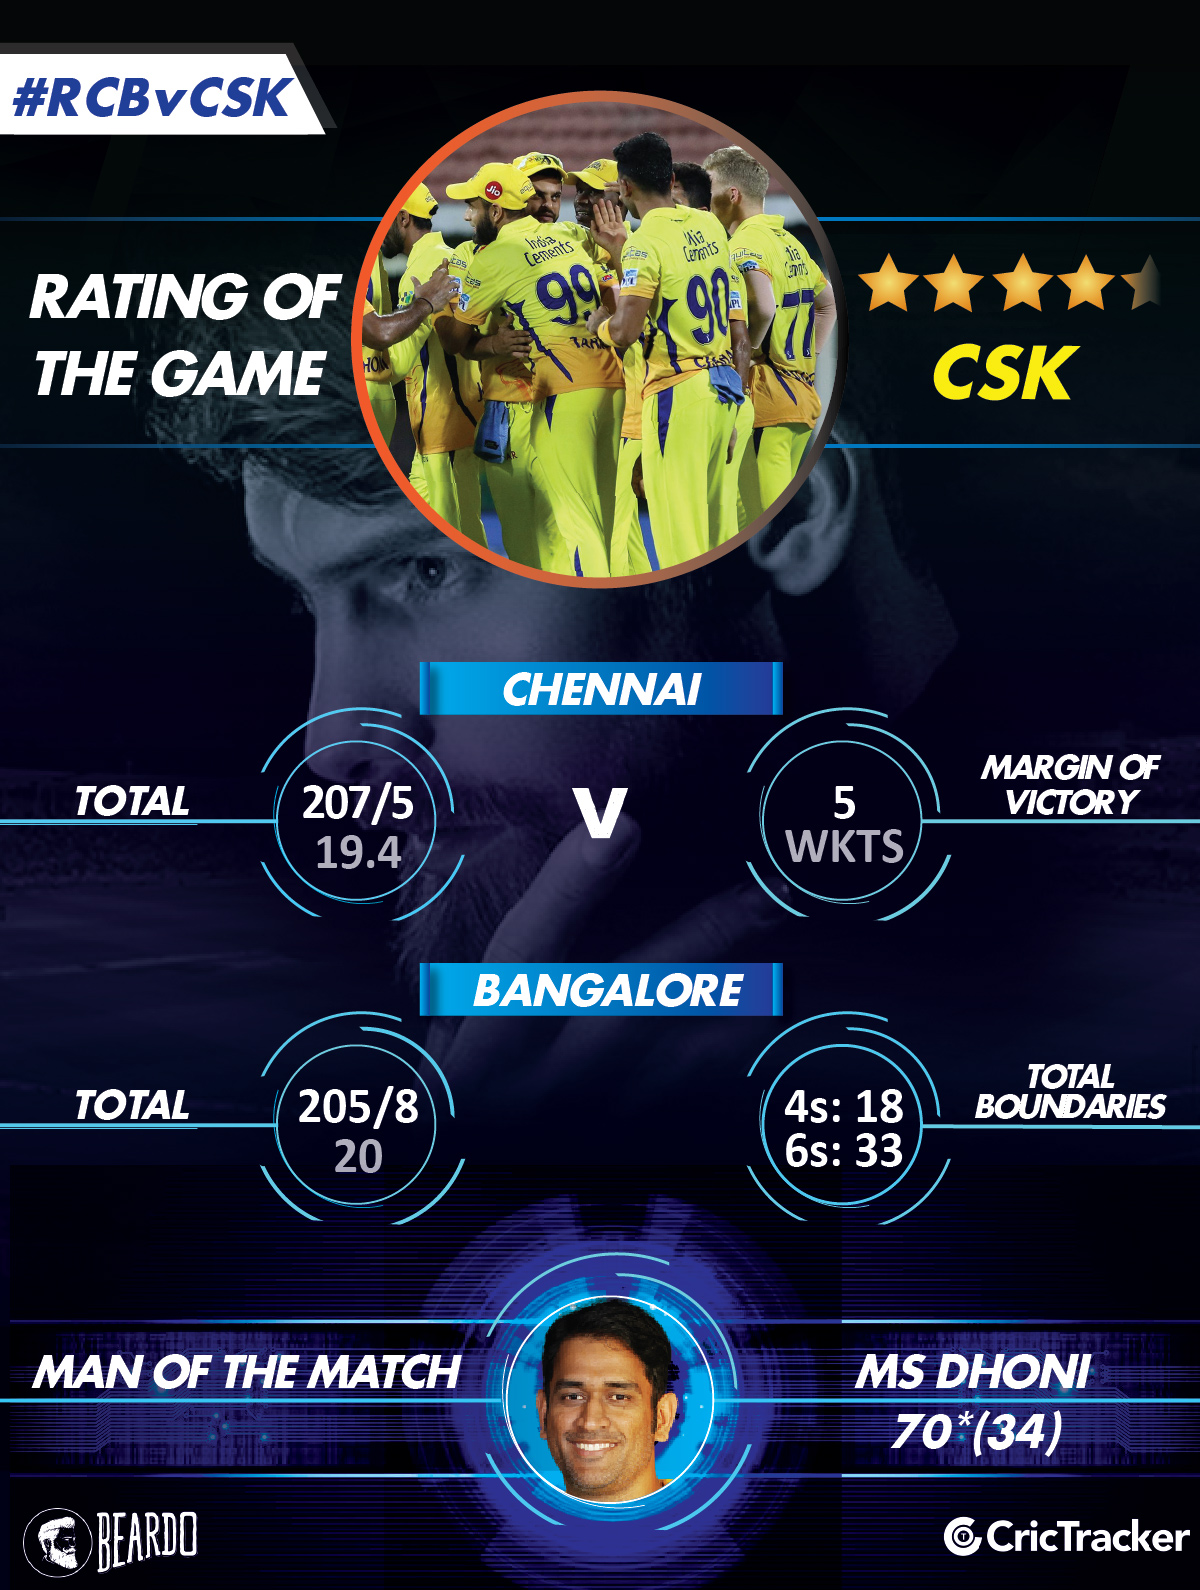 IPL2018-RCB-vs-CSK-RatinG-of-the-matcH